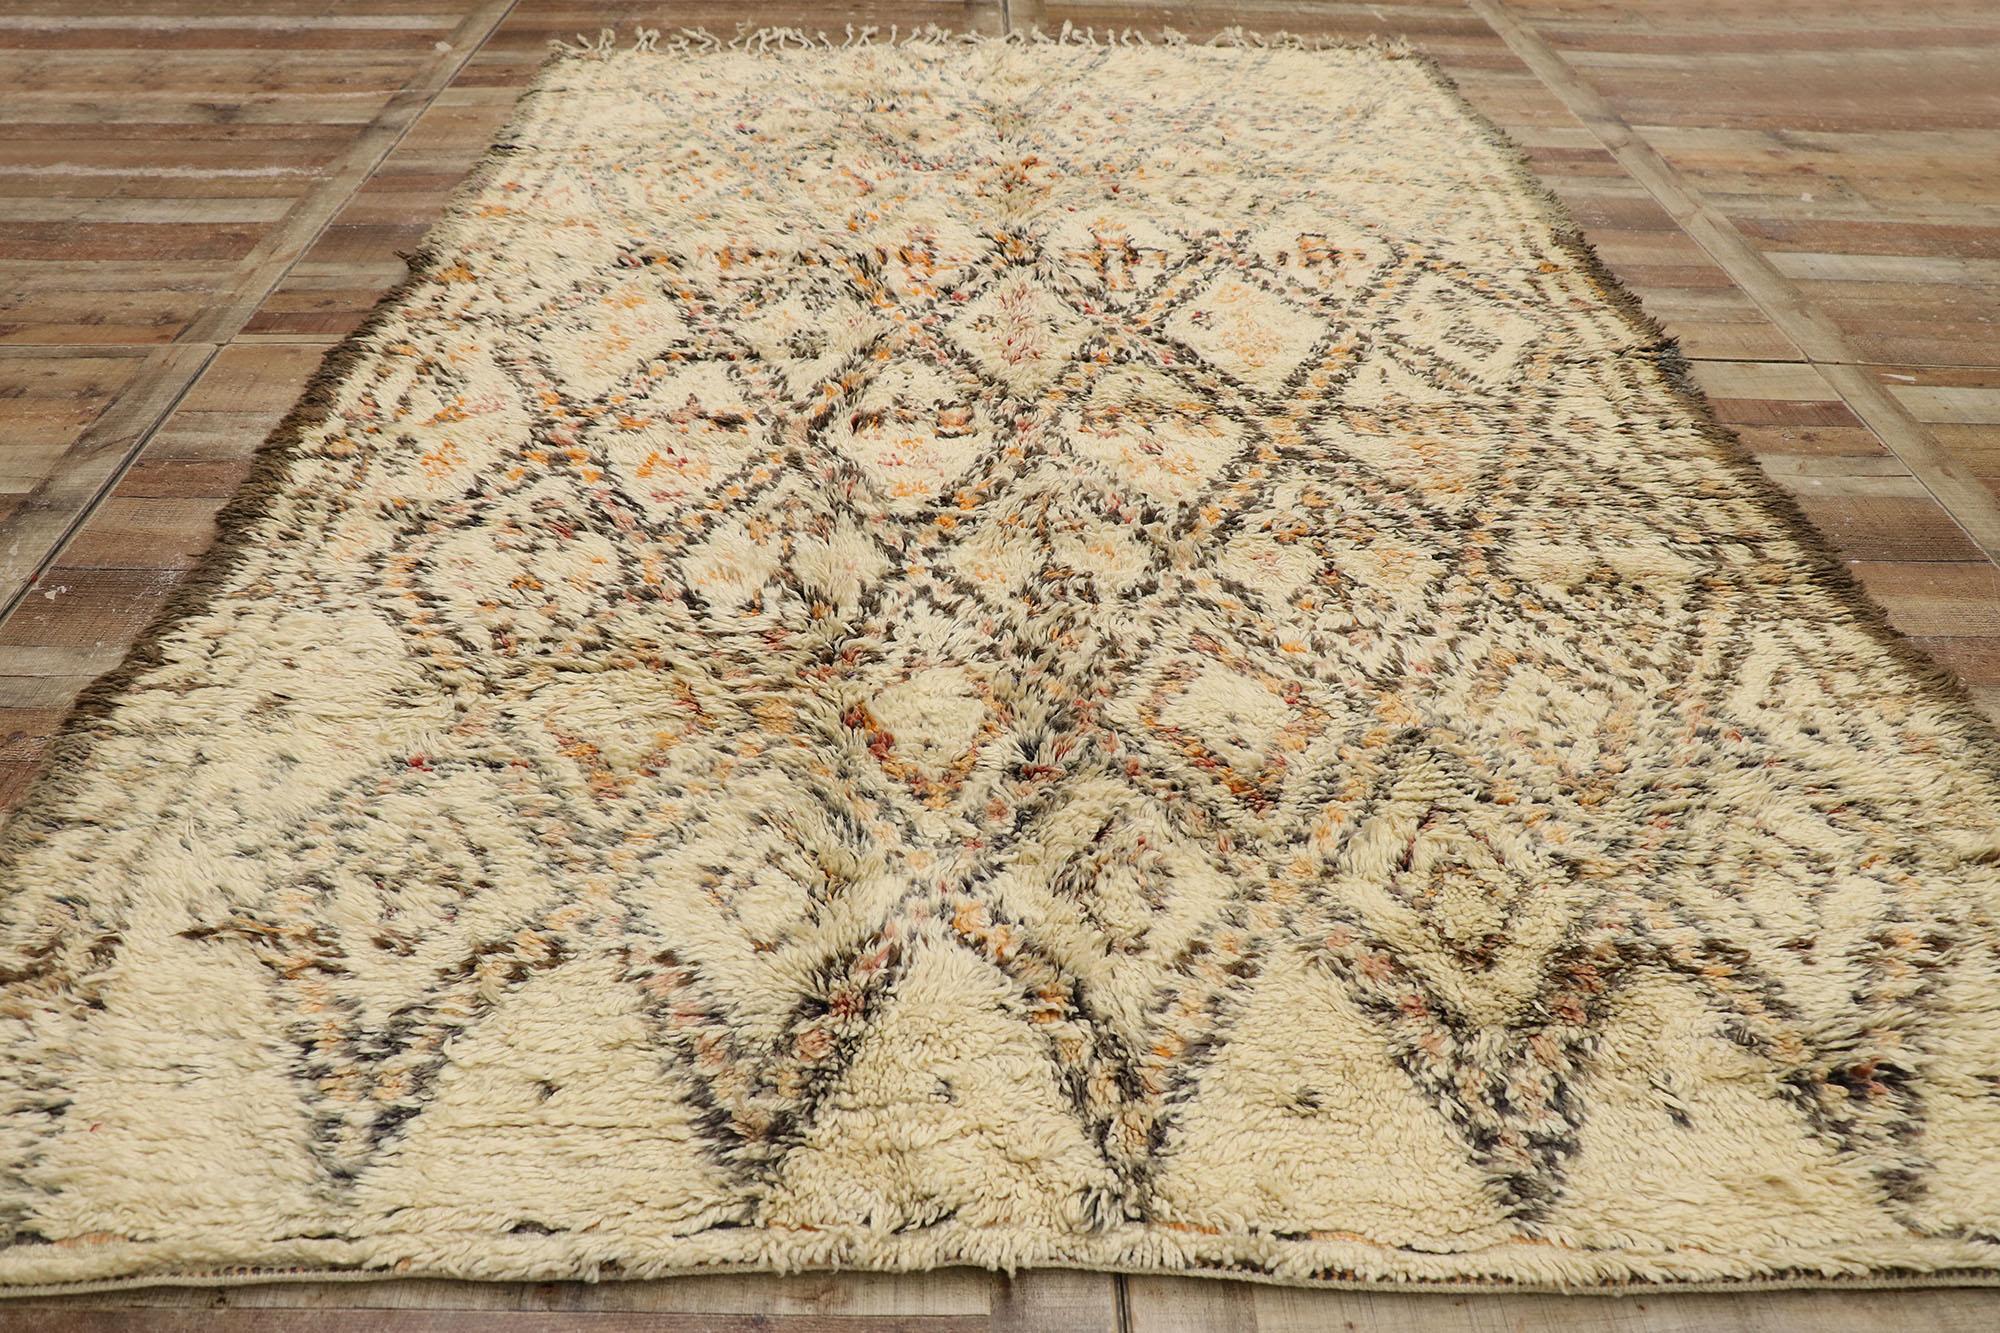 Wool Vintage Beni Ourain Moroccan Rug, Nomadic Charm Meets Midcentury Modern Style For Sale